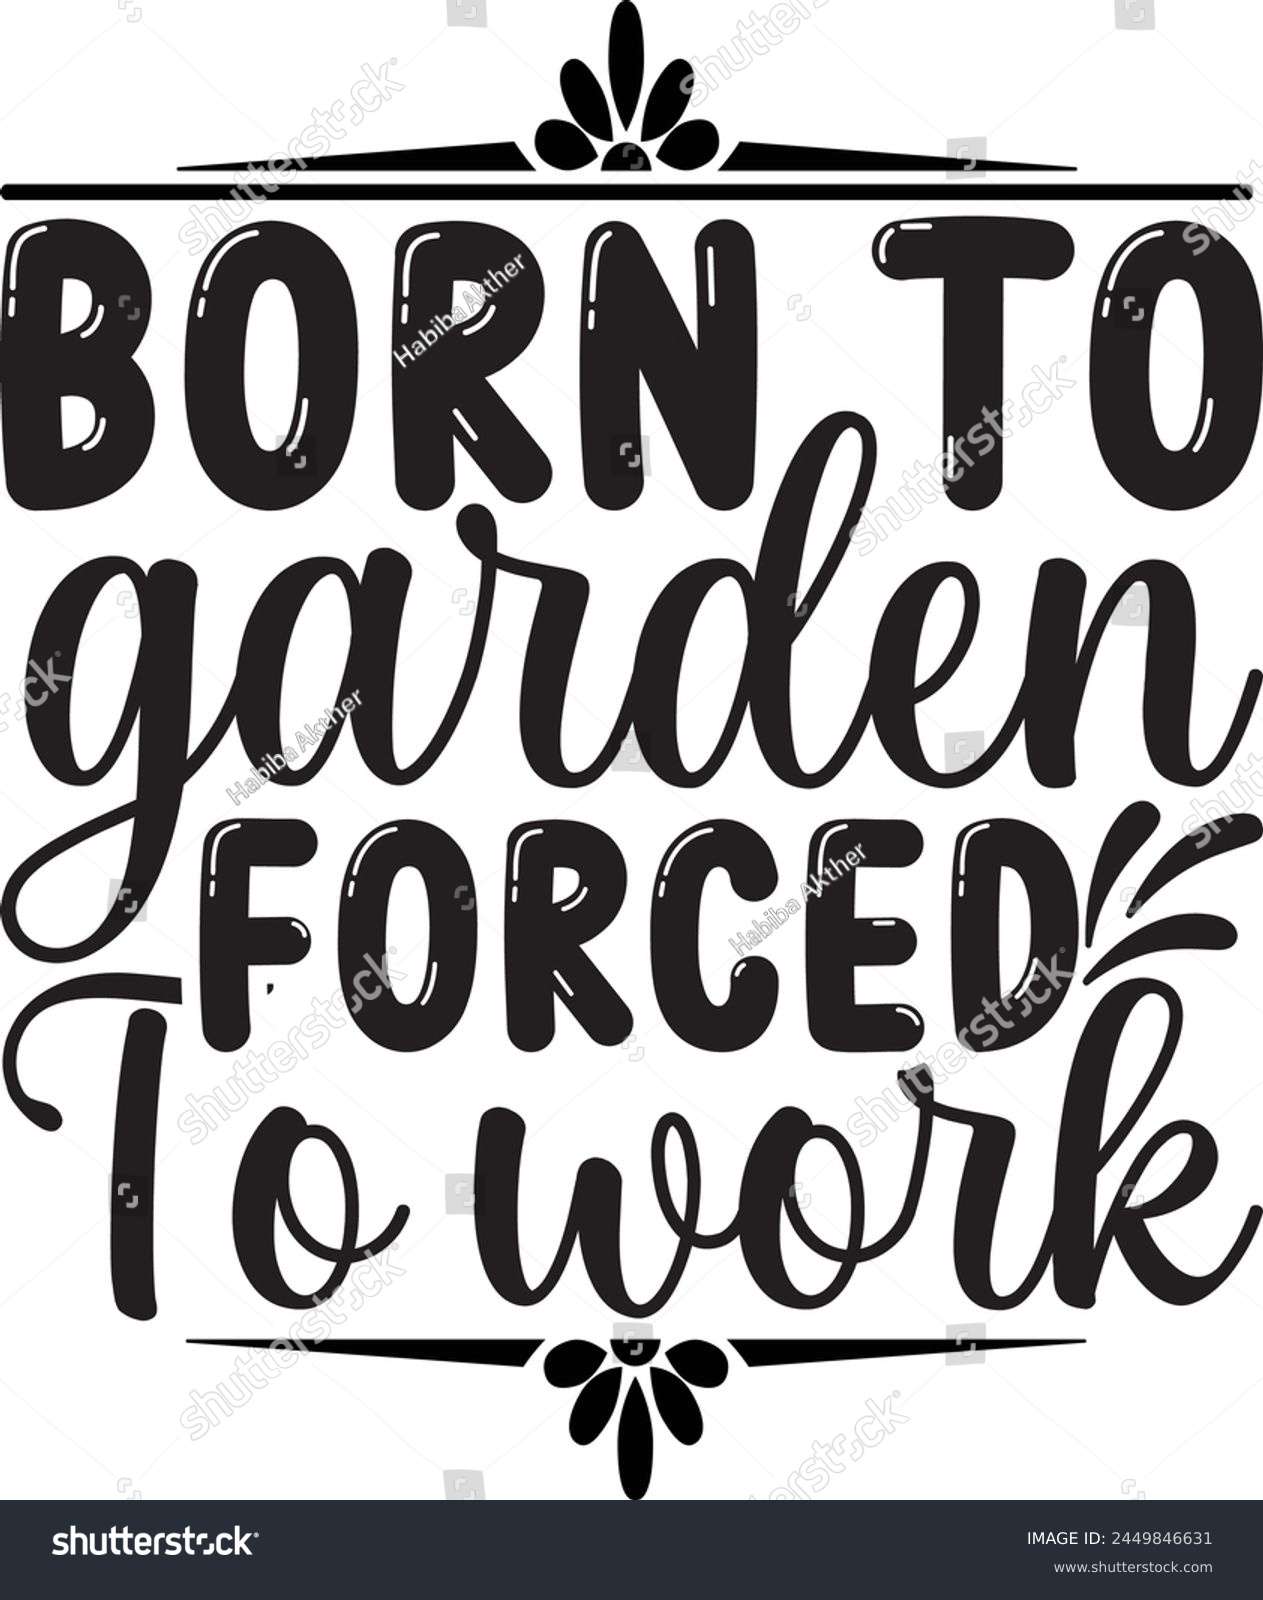 SVG of Born to garden forced to work,A Little Dirt never Hurt Anyone,Cute Garden Design,Dirt Design,EPS,be kind,Bloom,Book Addict,Lover,Forced To Work,crazy plant,Plant Mom, svg